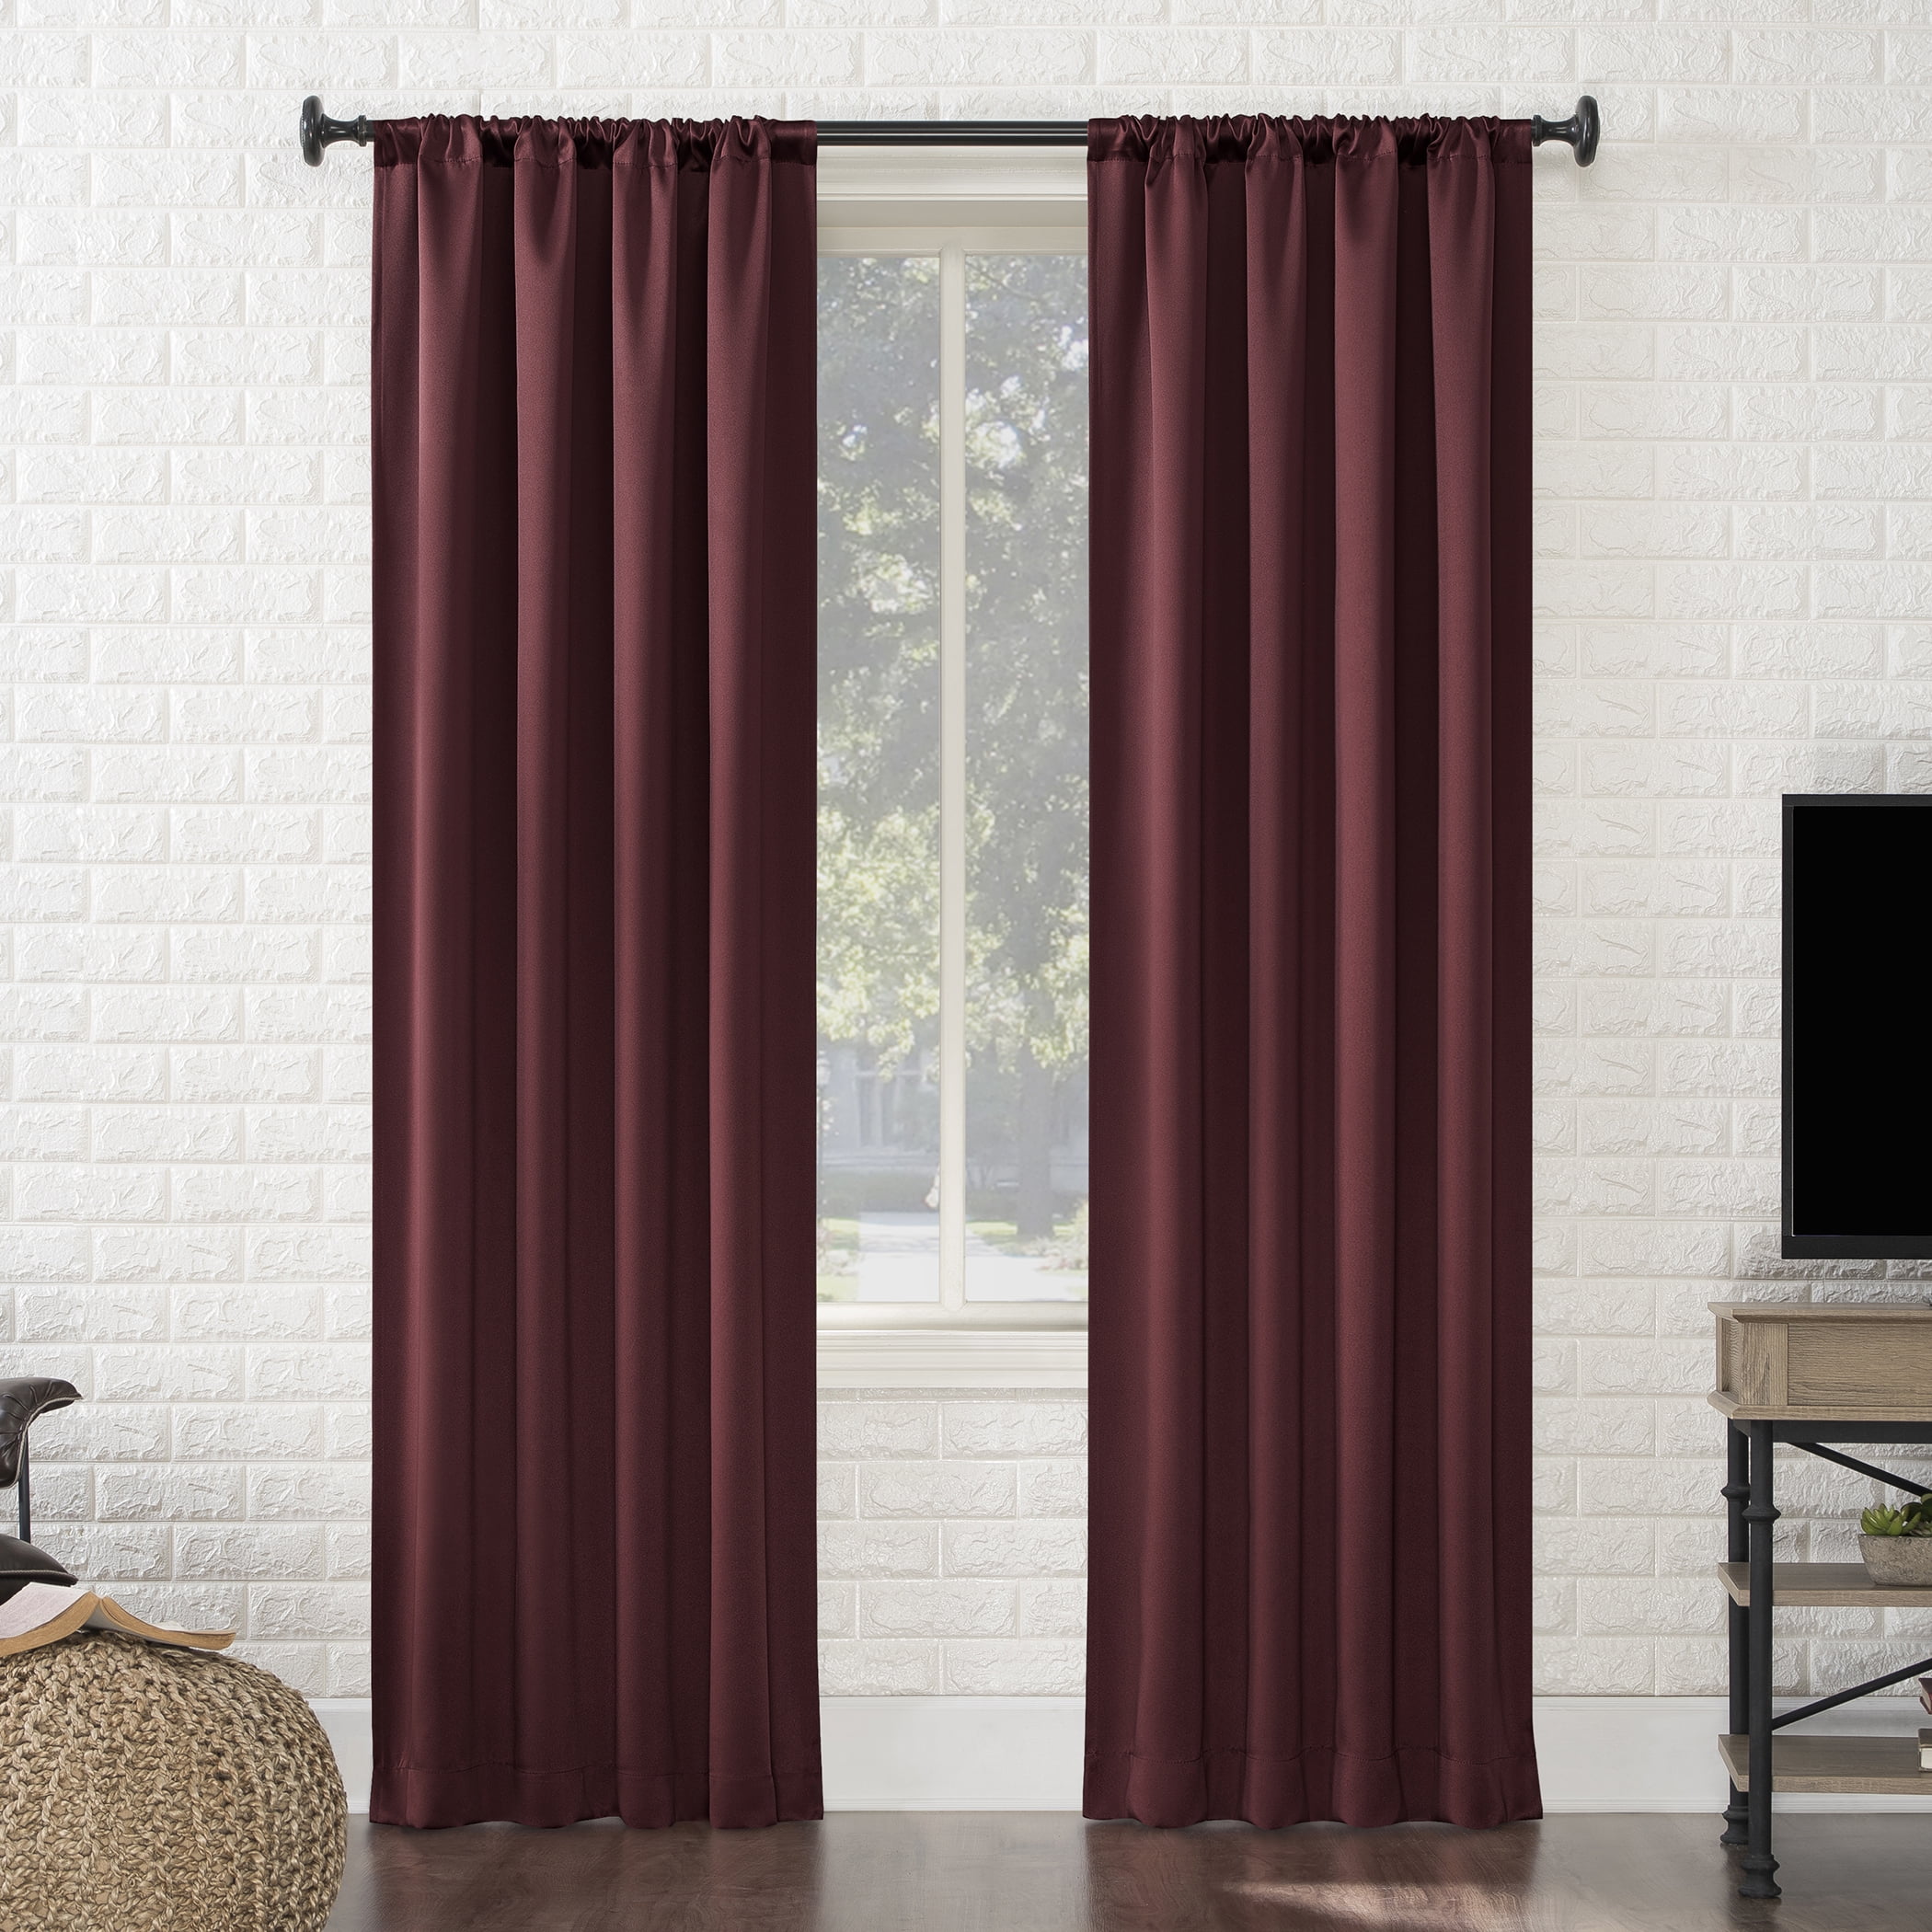 Details about   100% Blackout Curtains Rod Pocket Noise Reducing Sun Blocking for Bedroom,1 Pair 